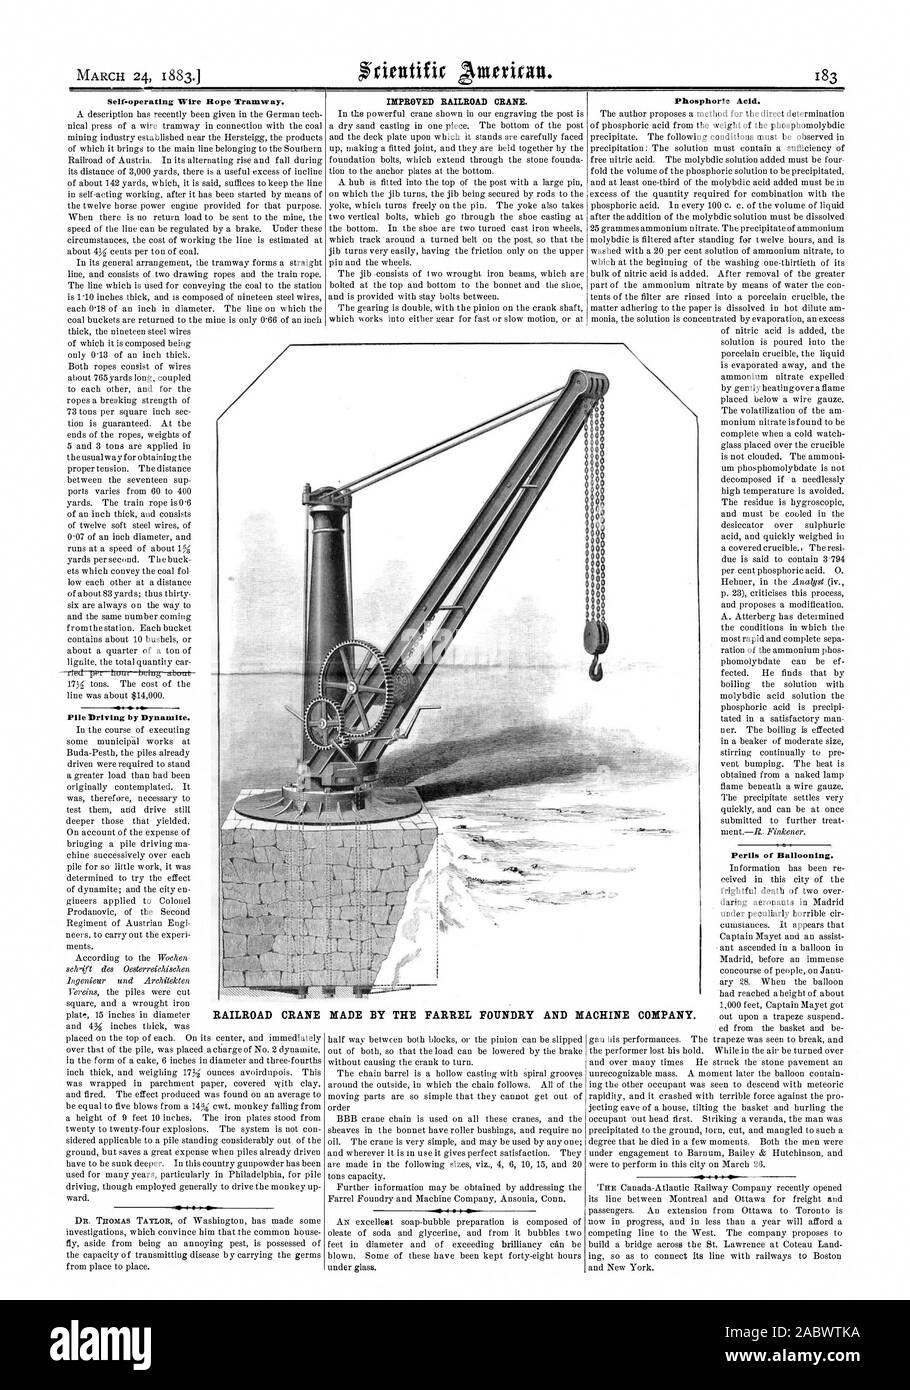 Self-operating Wire Rope Tramway. Pile Driving by Dynamite. IMPROVED RAILROAD CRANE. Phosphoric Acid. Perils of Ballooning. RAILROAD CRANE MADE BY THE FARREL FOUNDRY AND MACHINE COMPANY., scientific american, 1883-03-24 Stock Photo